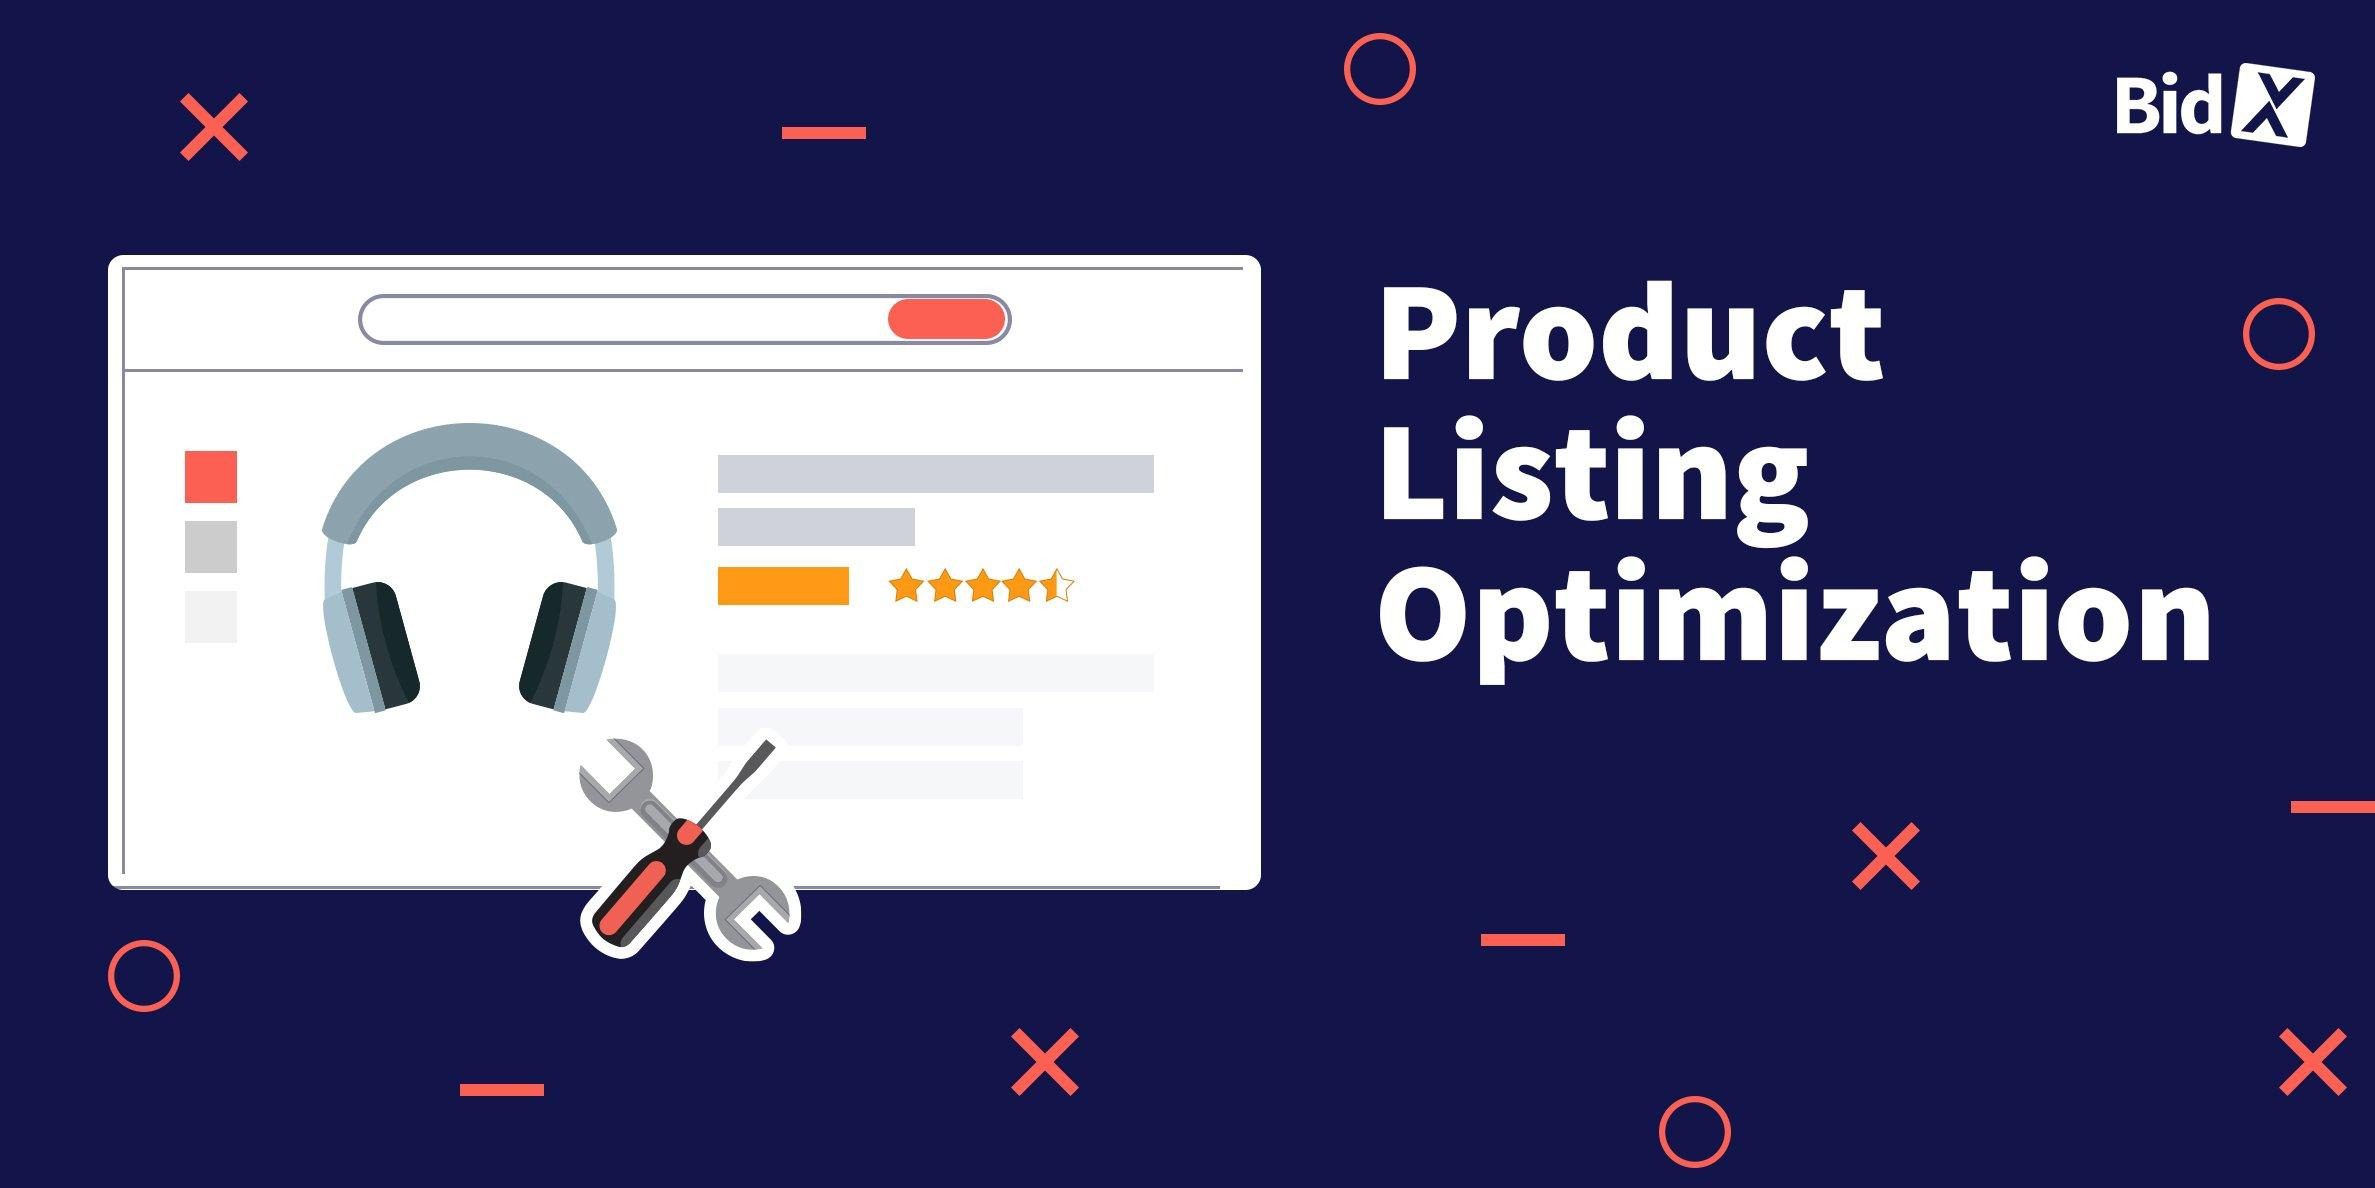 Why Amazon product listing optimization is important for SEO